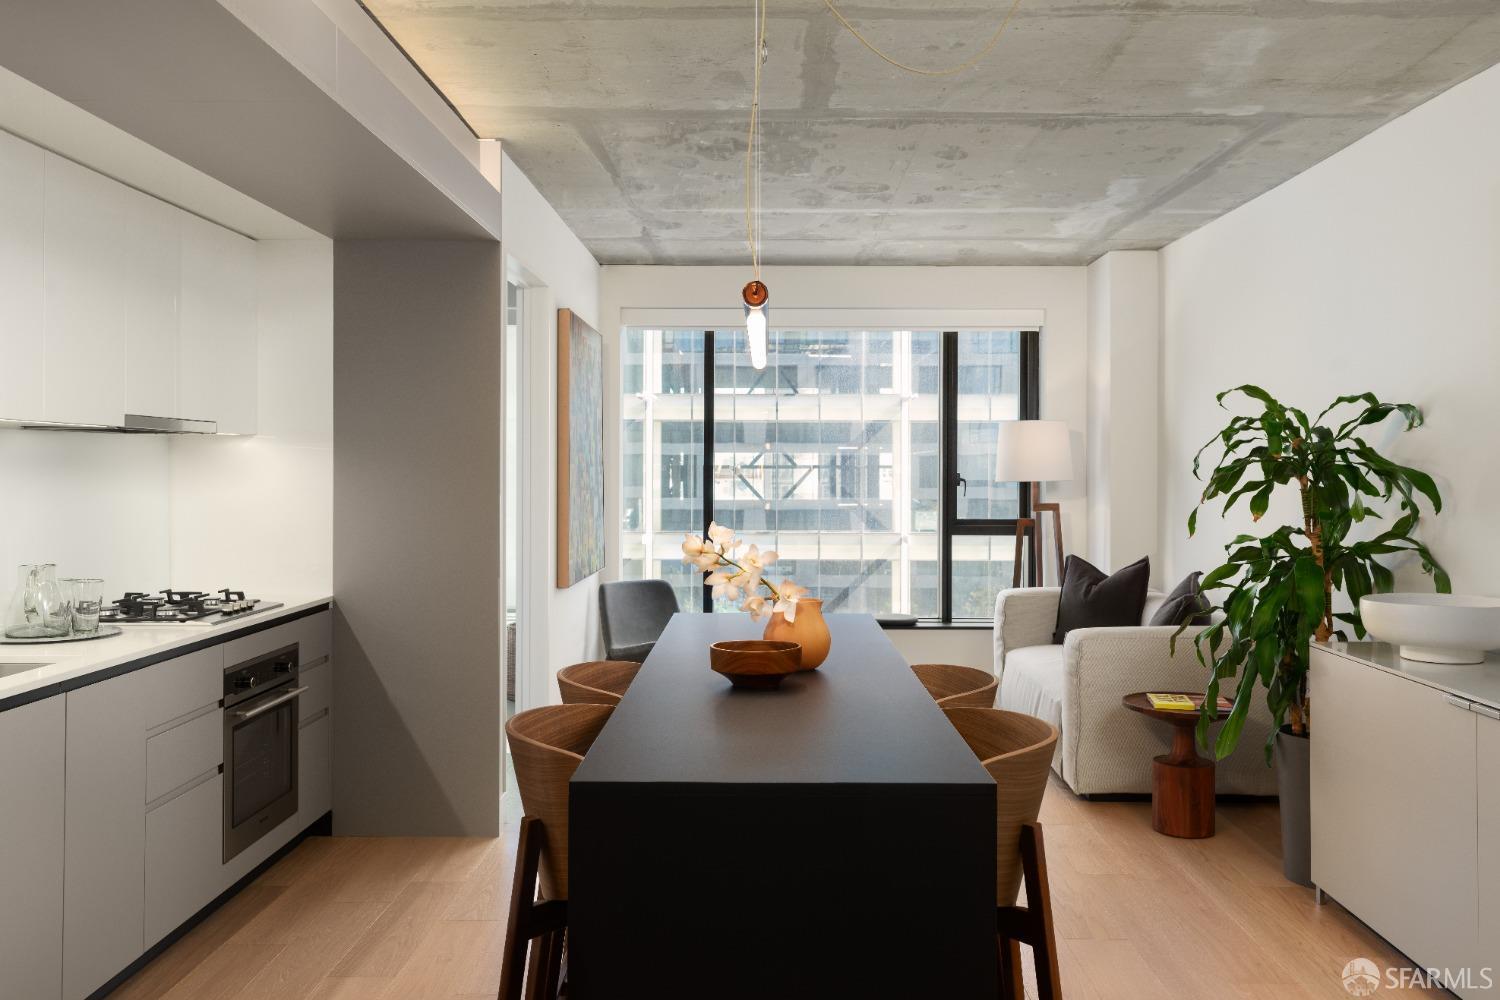 Photo of 960 Market St #207 in San Francisco, CA